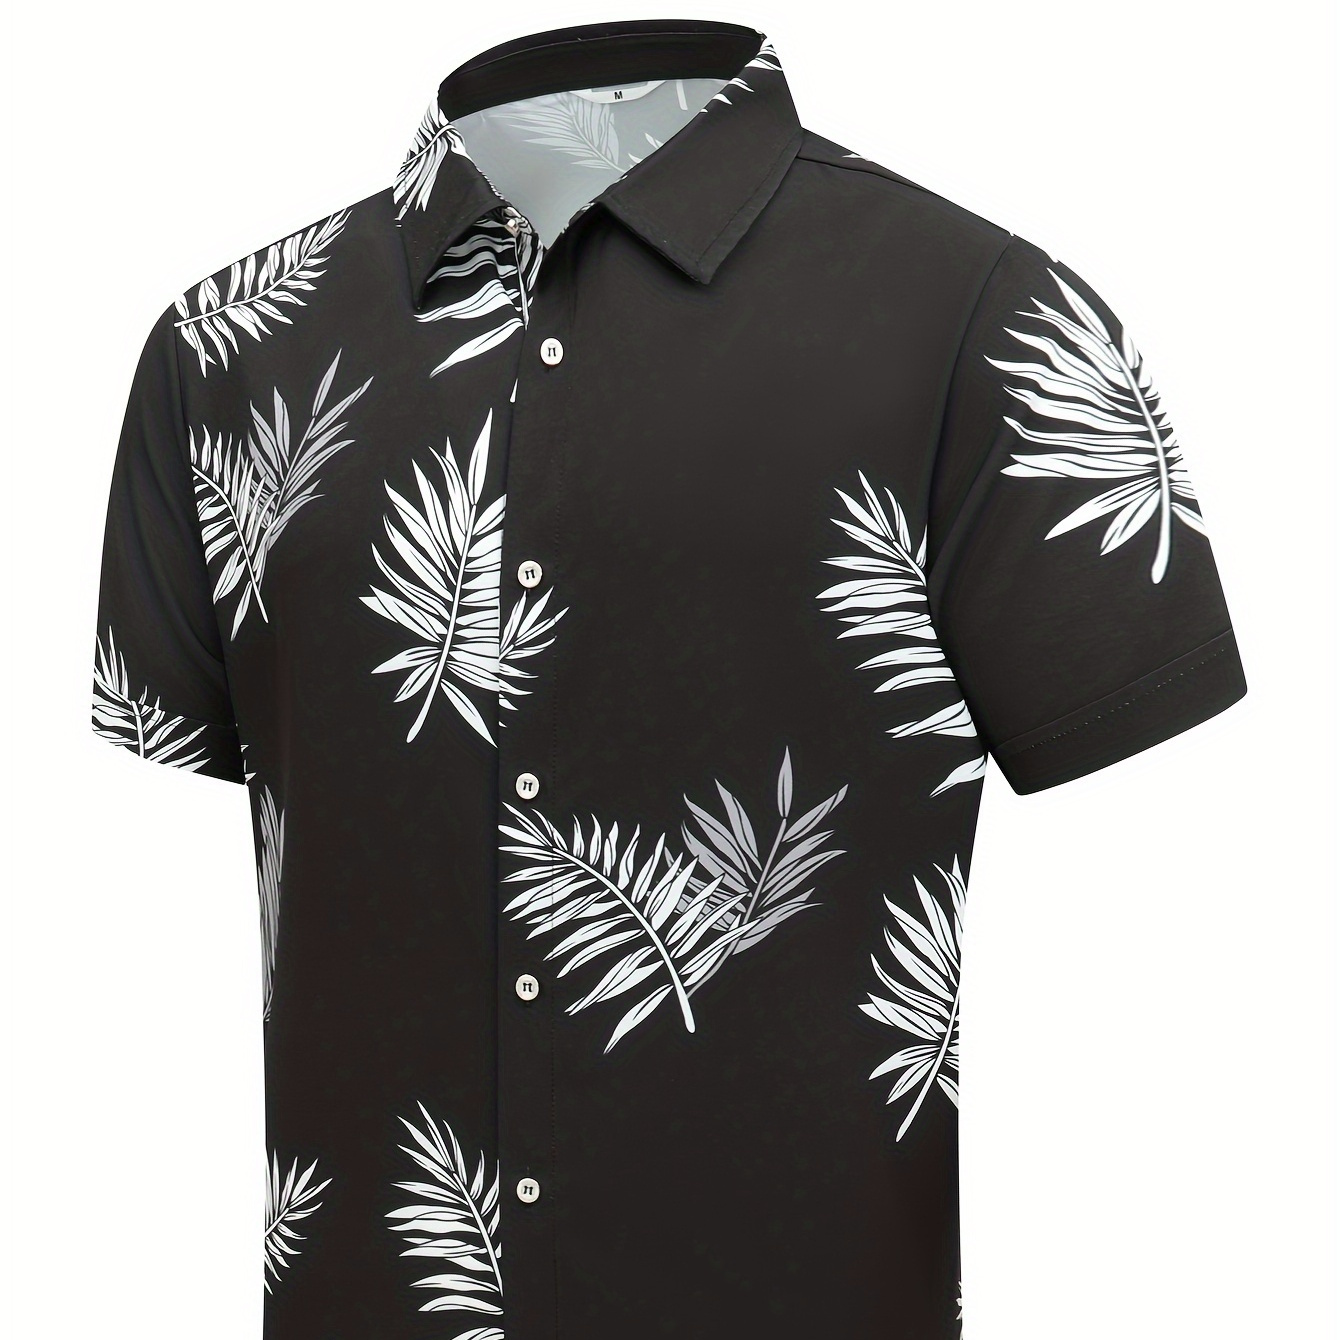 

Black Background Leaves, Hawaiian Men's Shirt, Unisex Summer Beach Casual Short Sleeved Button Up Shirt, Printed Tropical Plant Leaves Daily